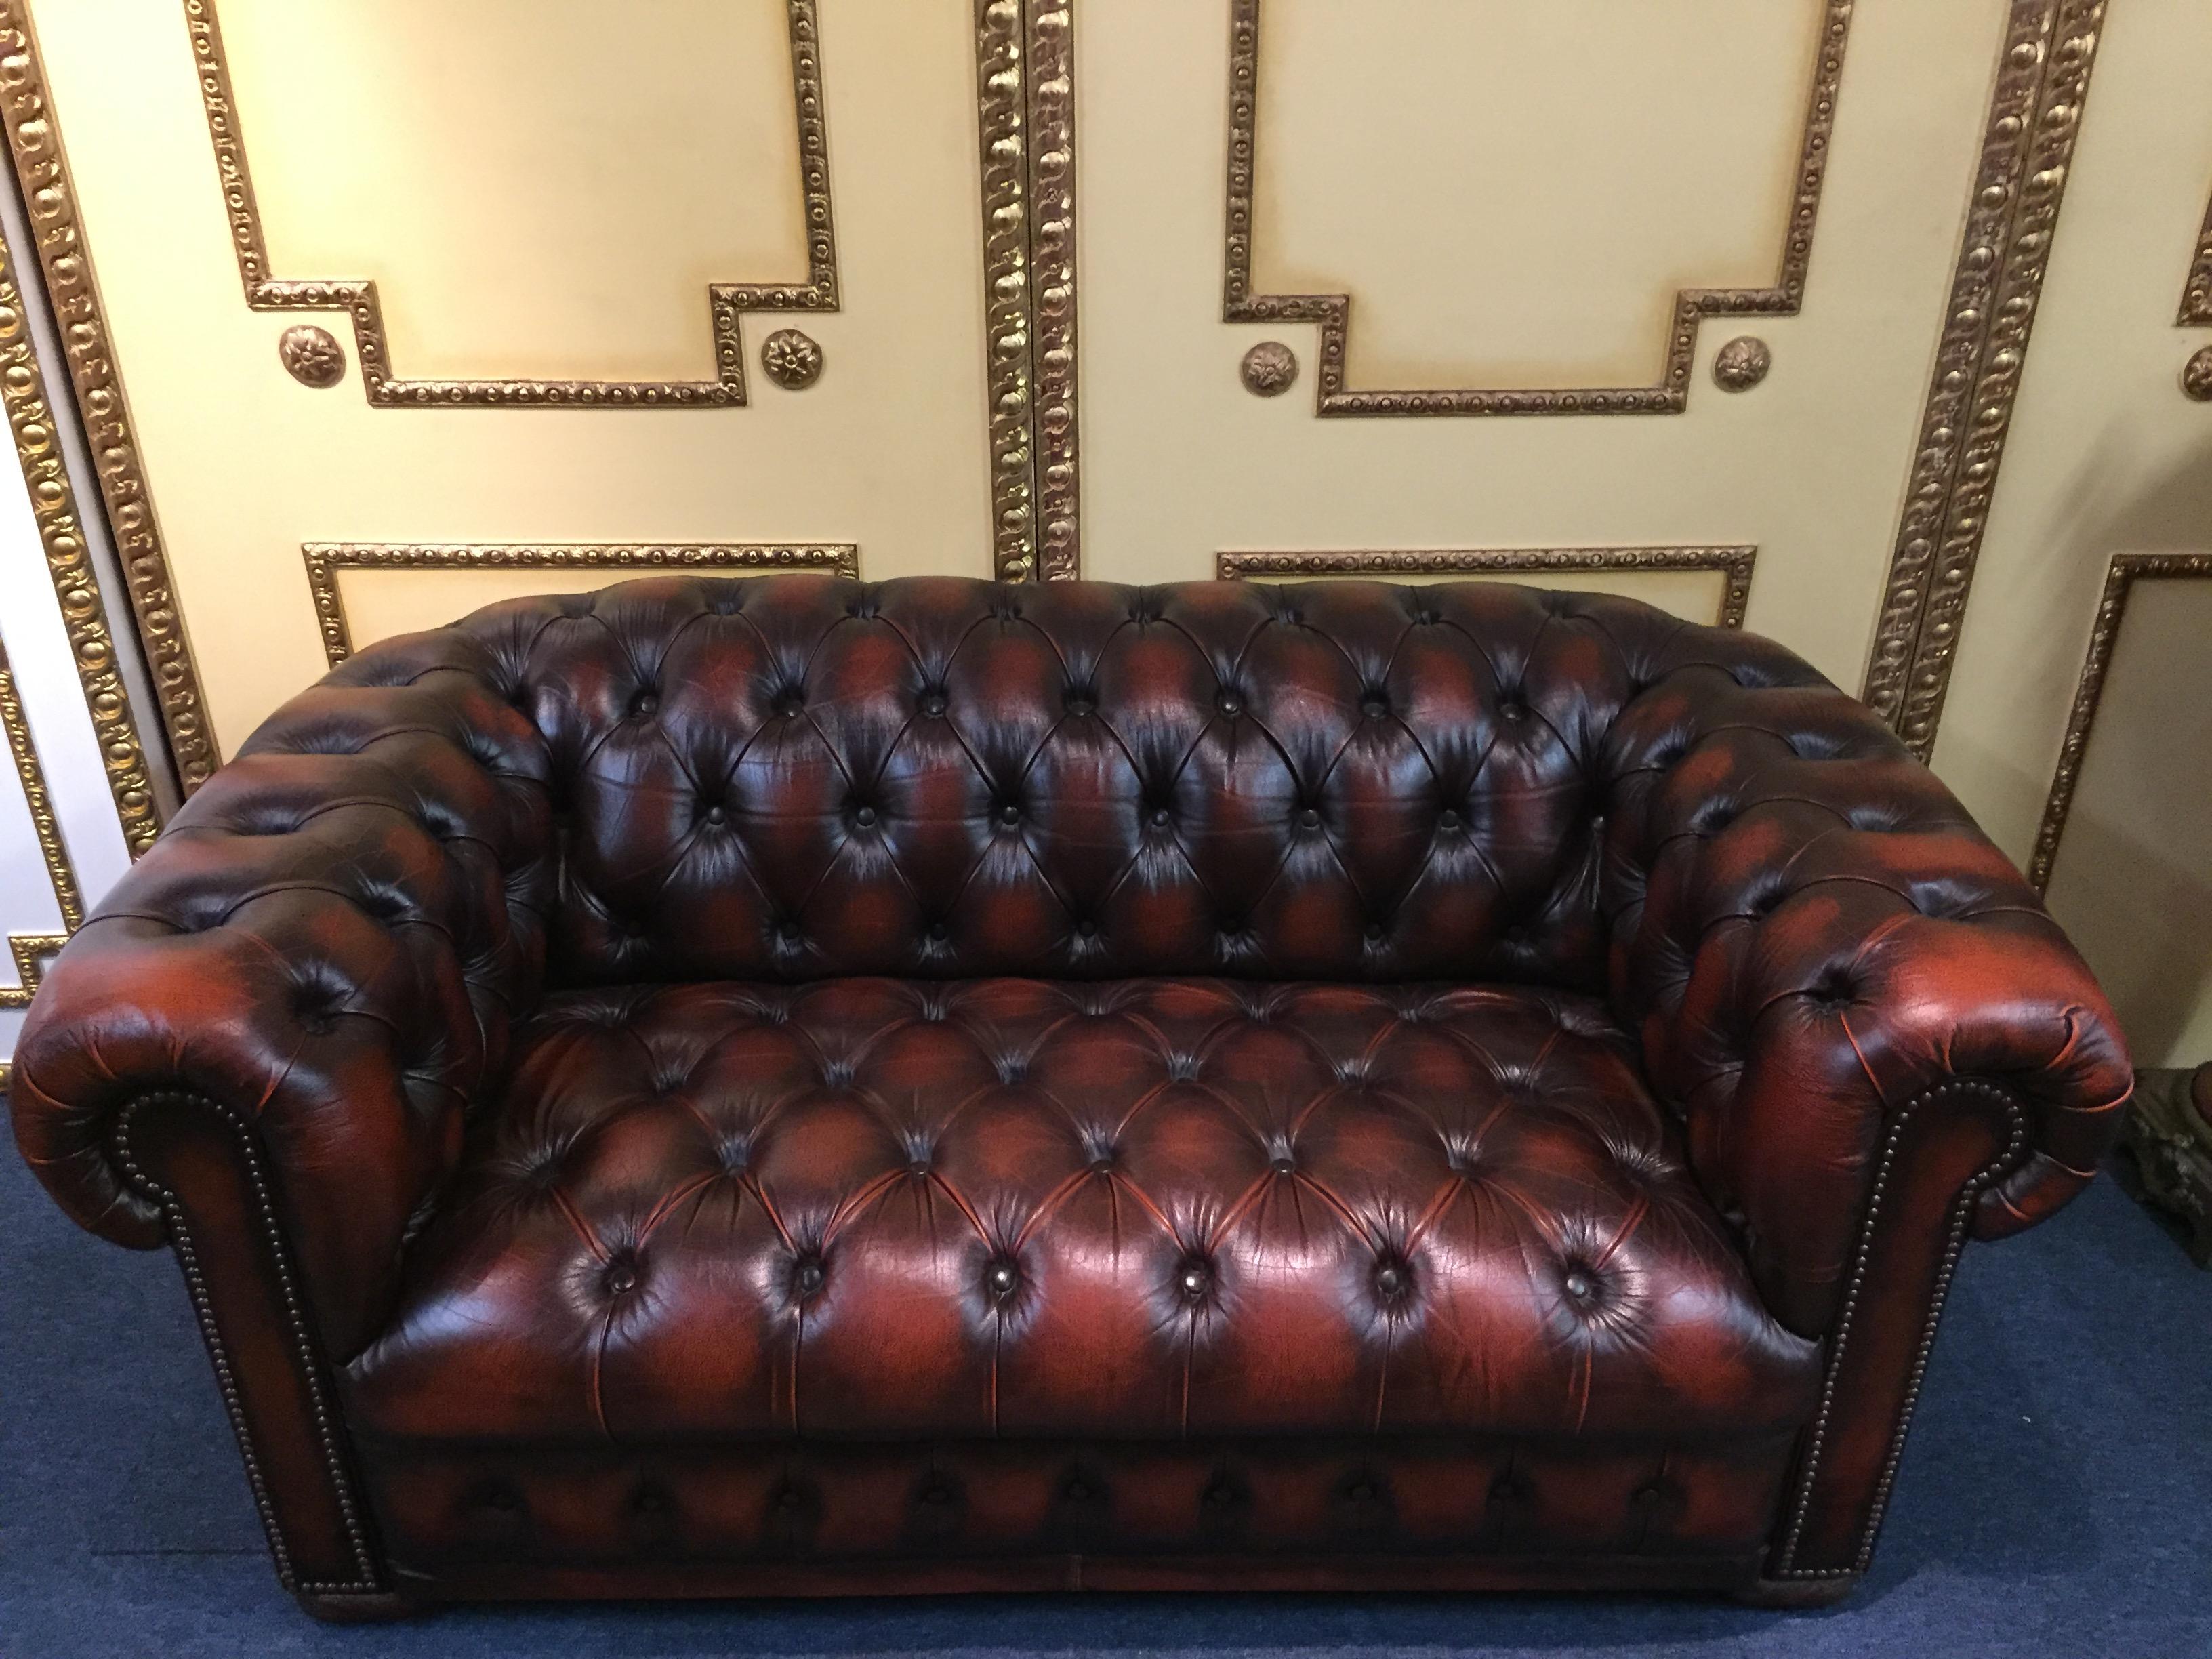 Classic chesterfield two-seat sofa England import.
Ideal for the office or the stylishly furnished apartment. The sofa is completely worked with real leather without any artificial leather and is built on a solid wood frame.
All seams are made by